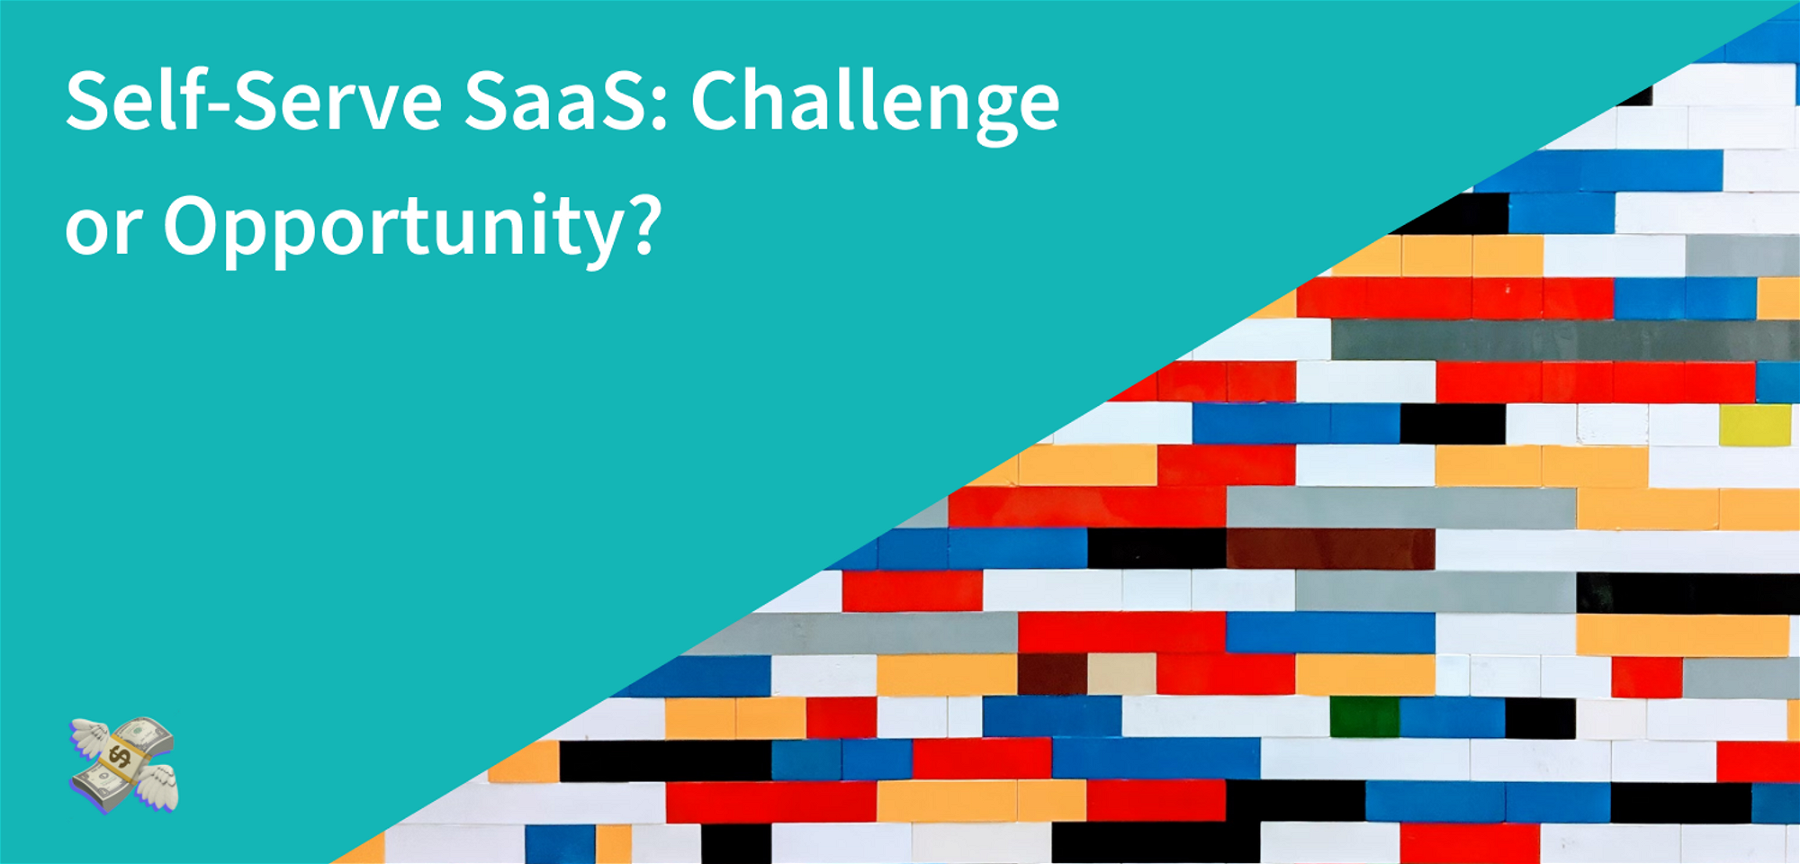 Self-Serve SaaS: Challenge or Opportunity?